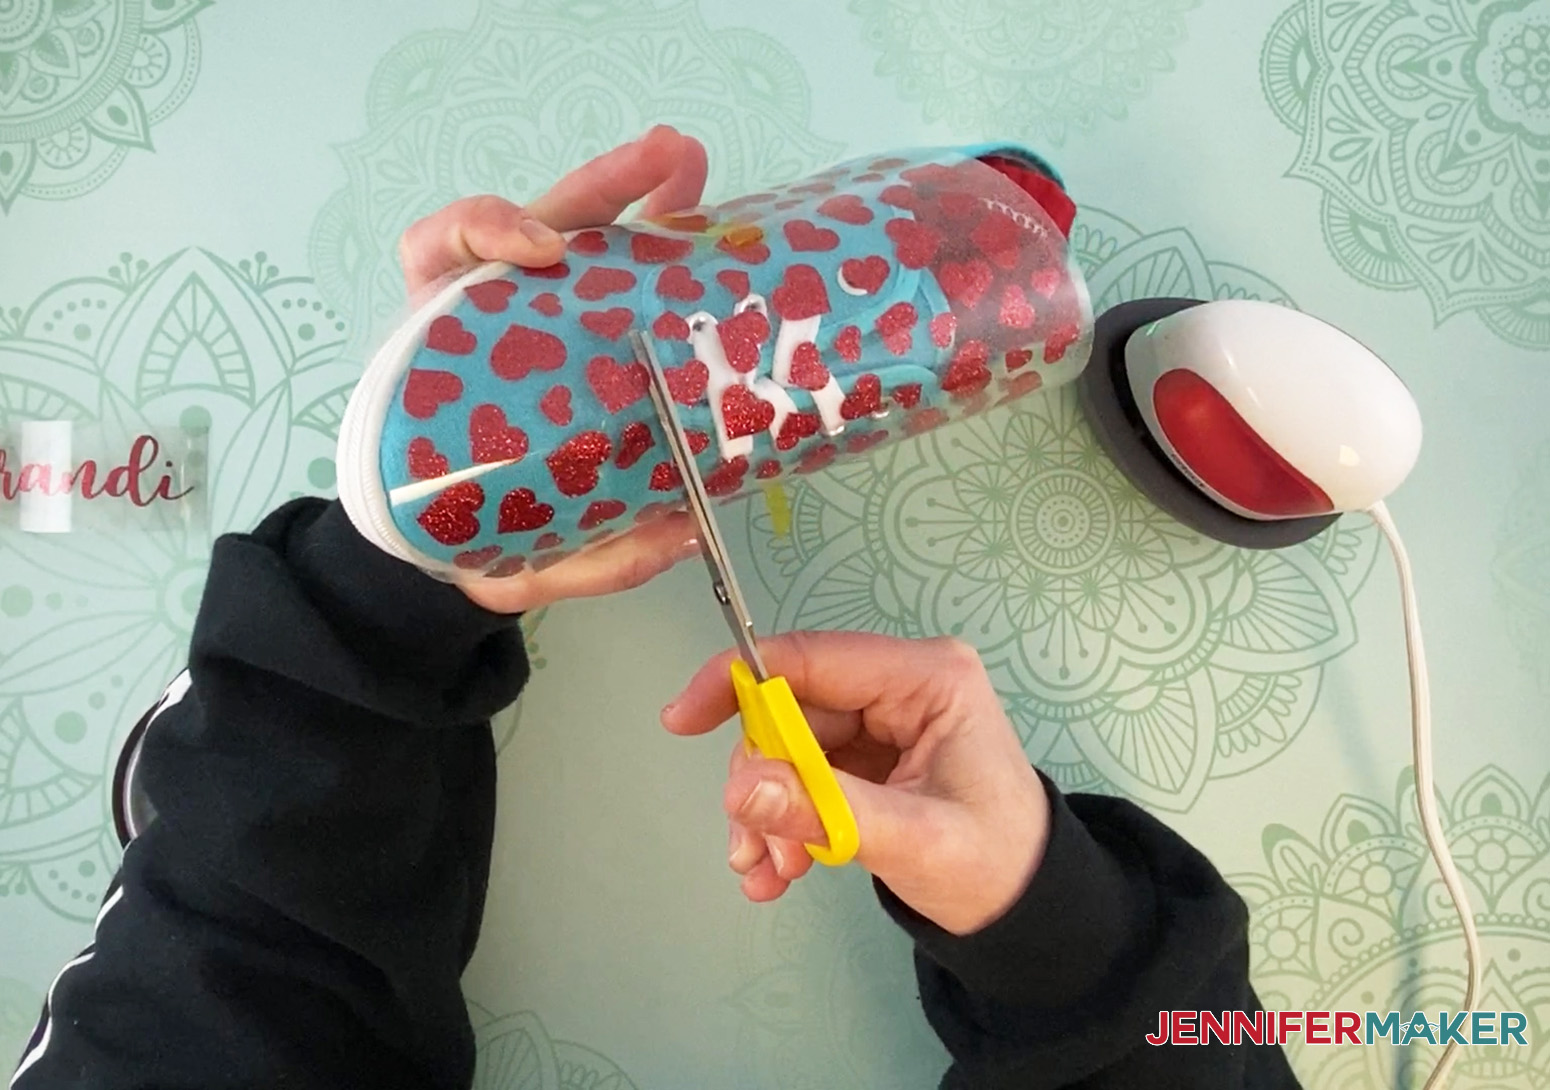 Trim off excess vinyl design before ironing to upcycle sneakers